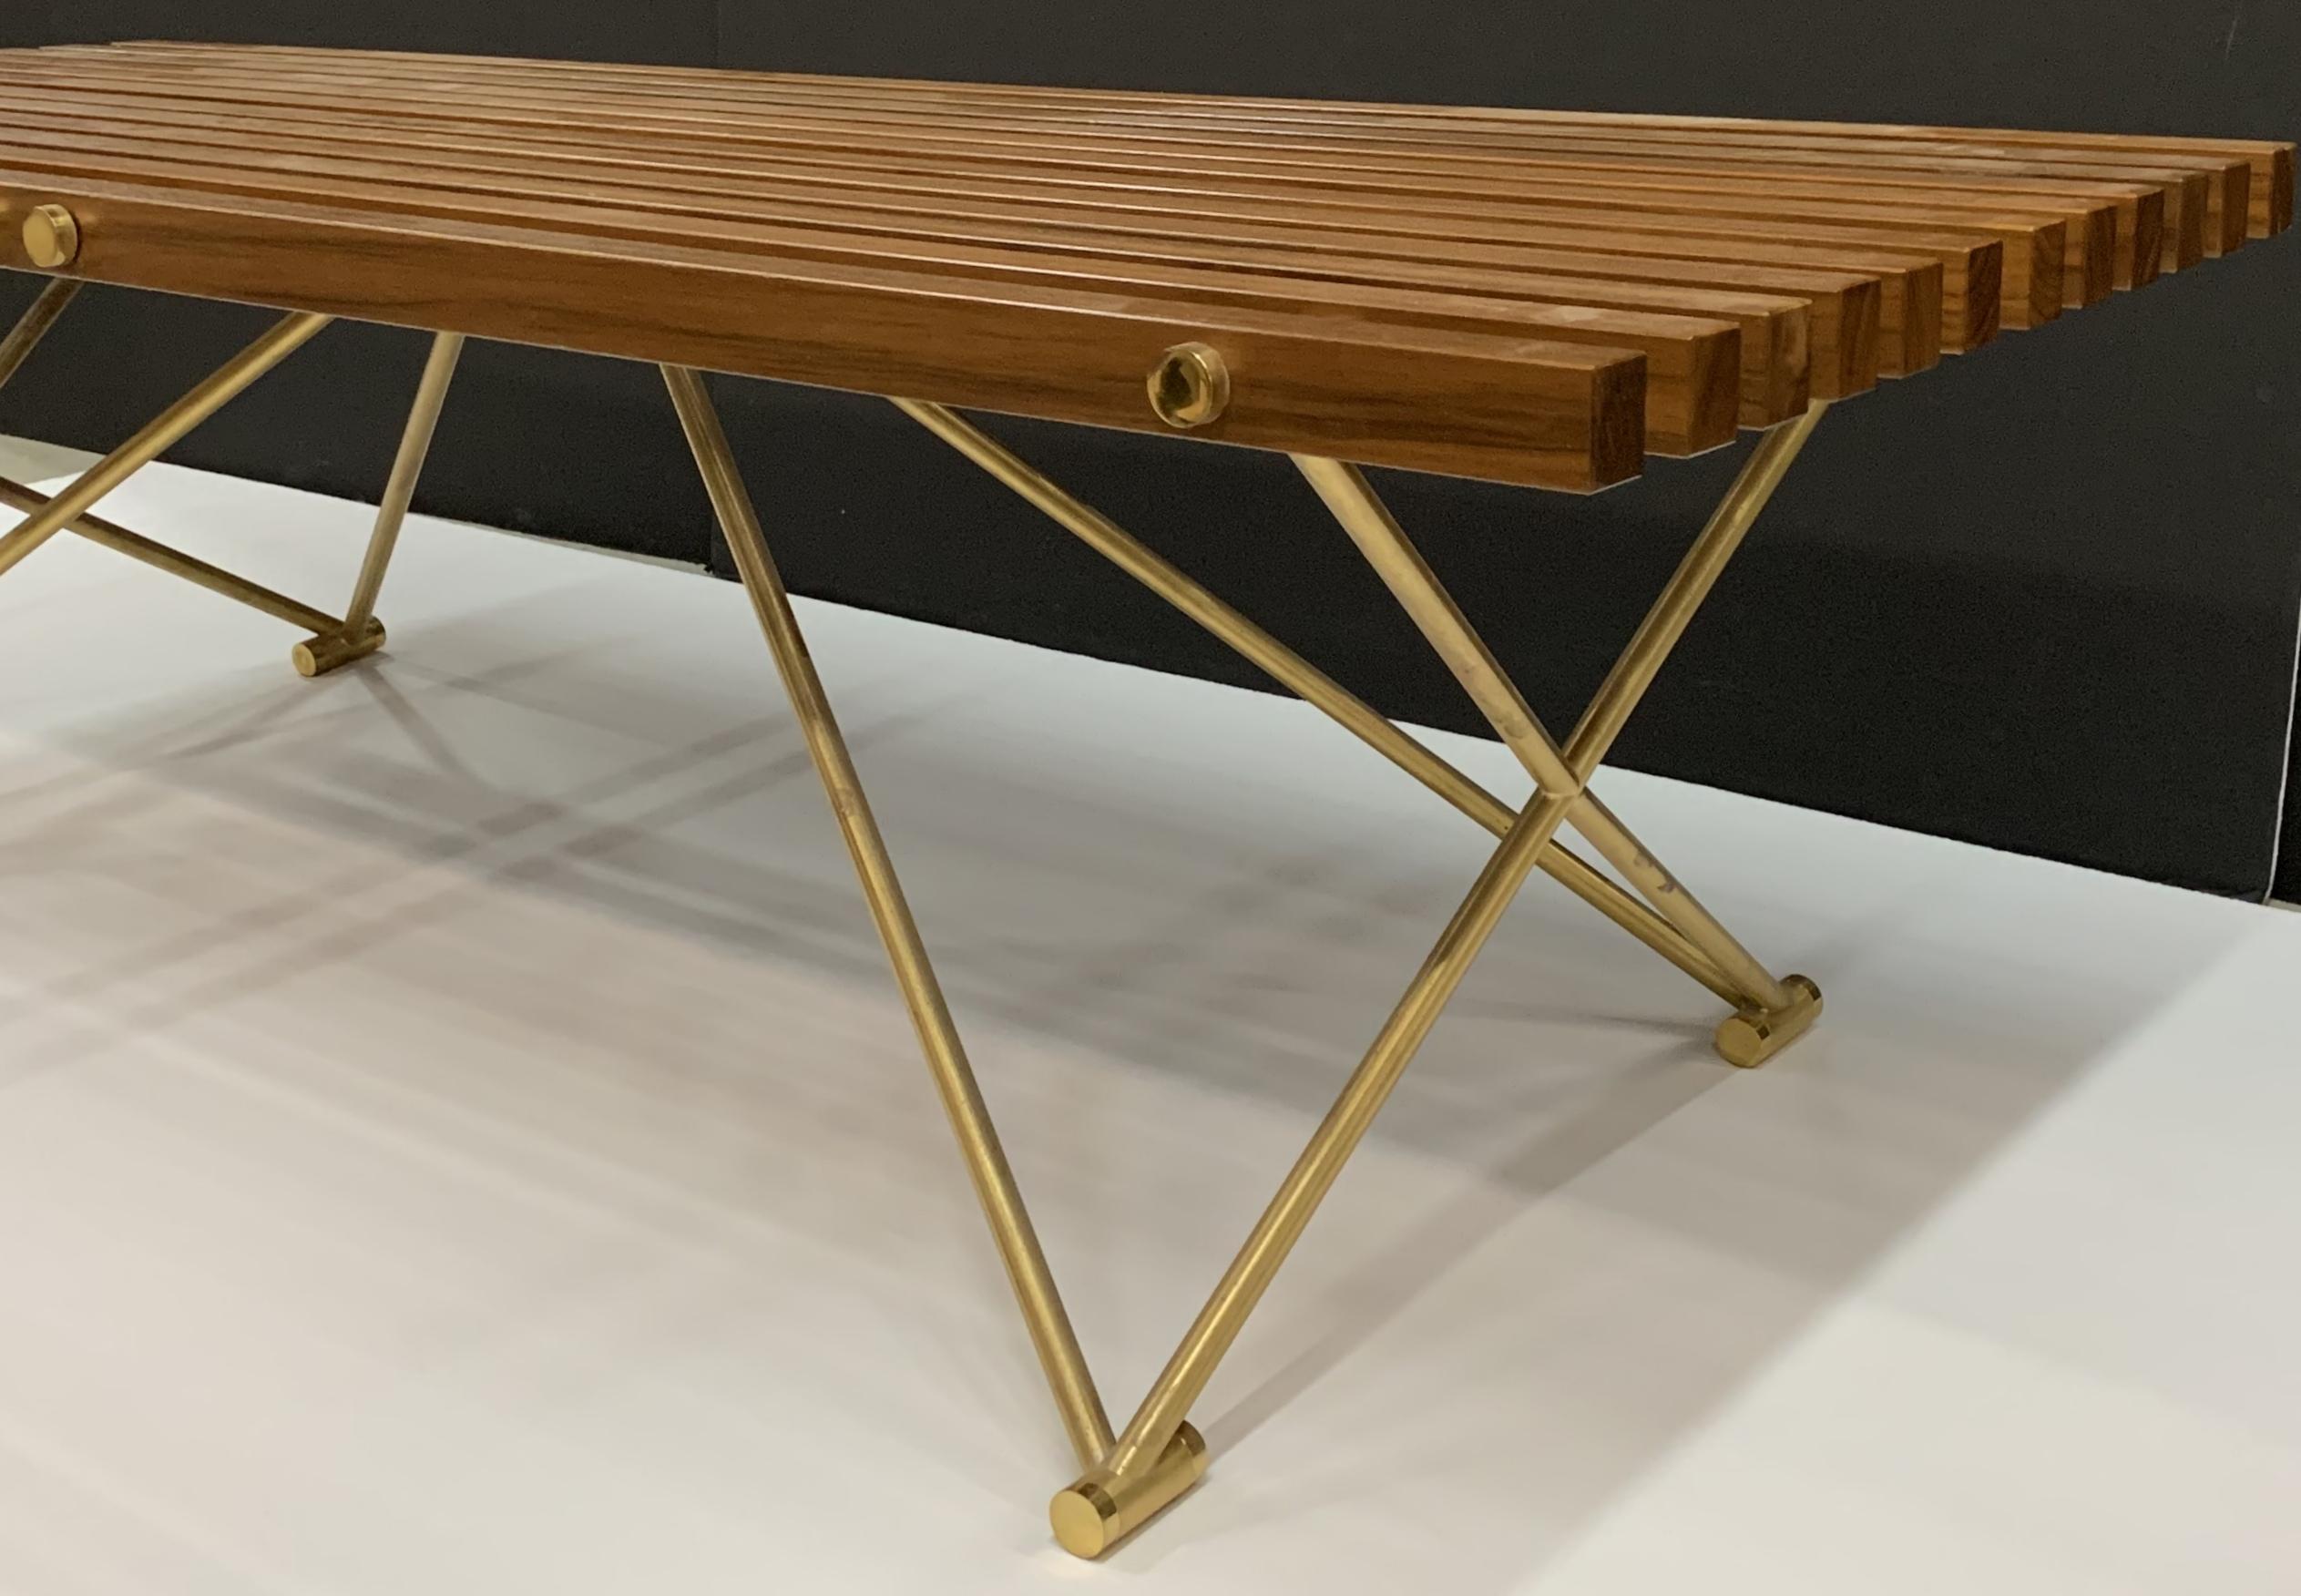 20th Century Wonderful Mid-Century Modern Wood Slat Polished Brass Coffee Cocktail Table For Sale